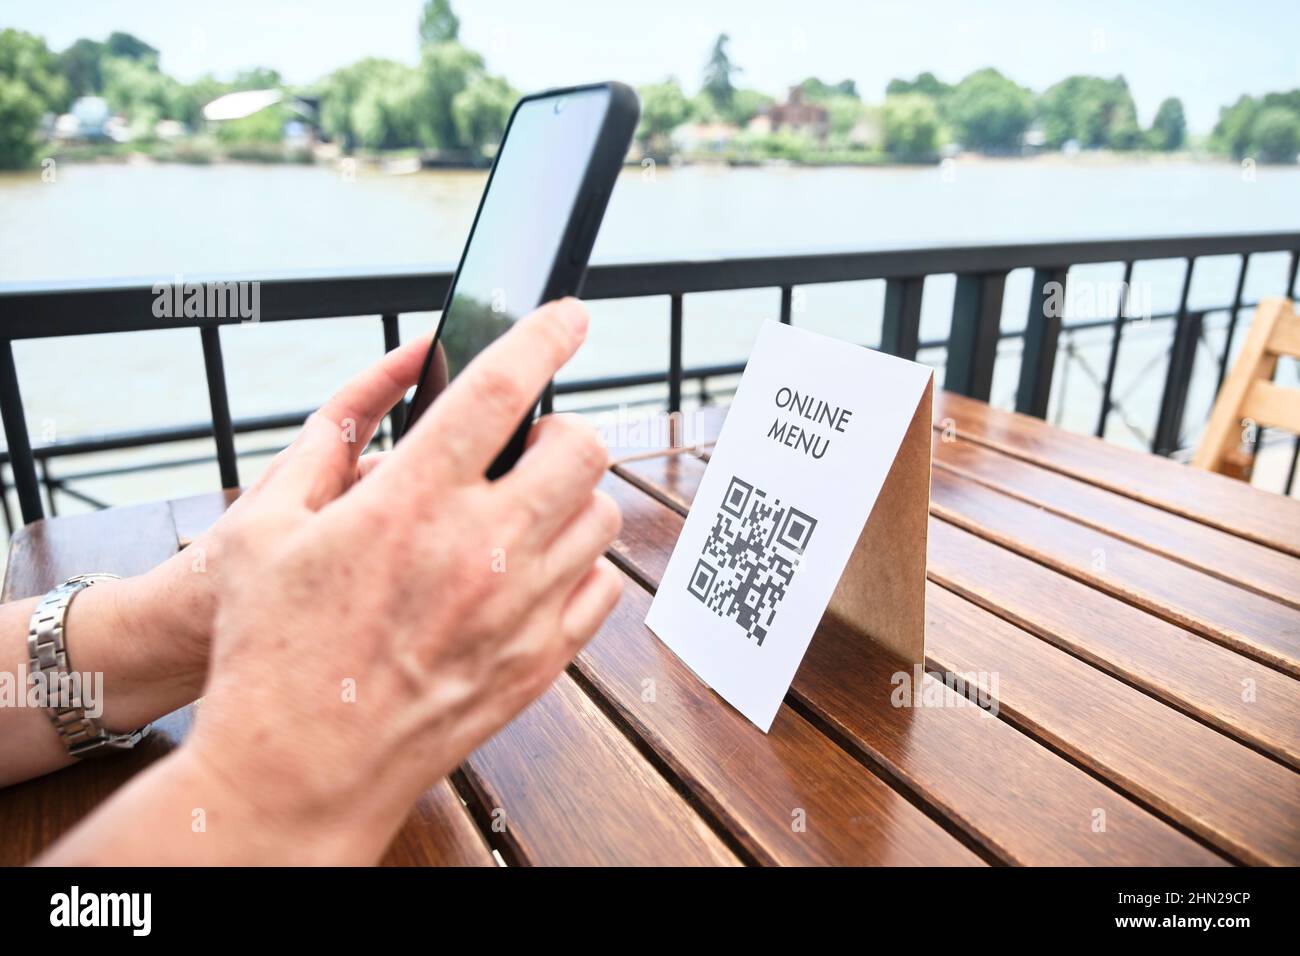 Hands of an unrecognizable woman scanning a QR code with a smartphone to access a restaurant menu; use of contactless technology in everyday life. Out Stock Photo